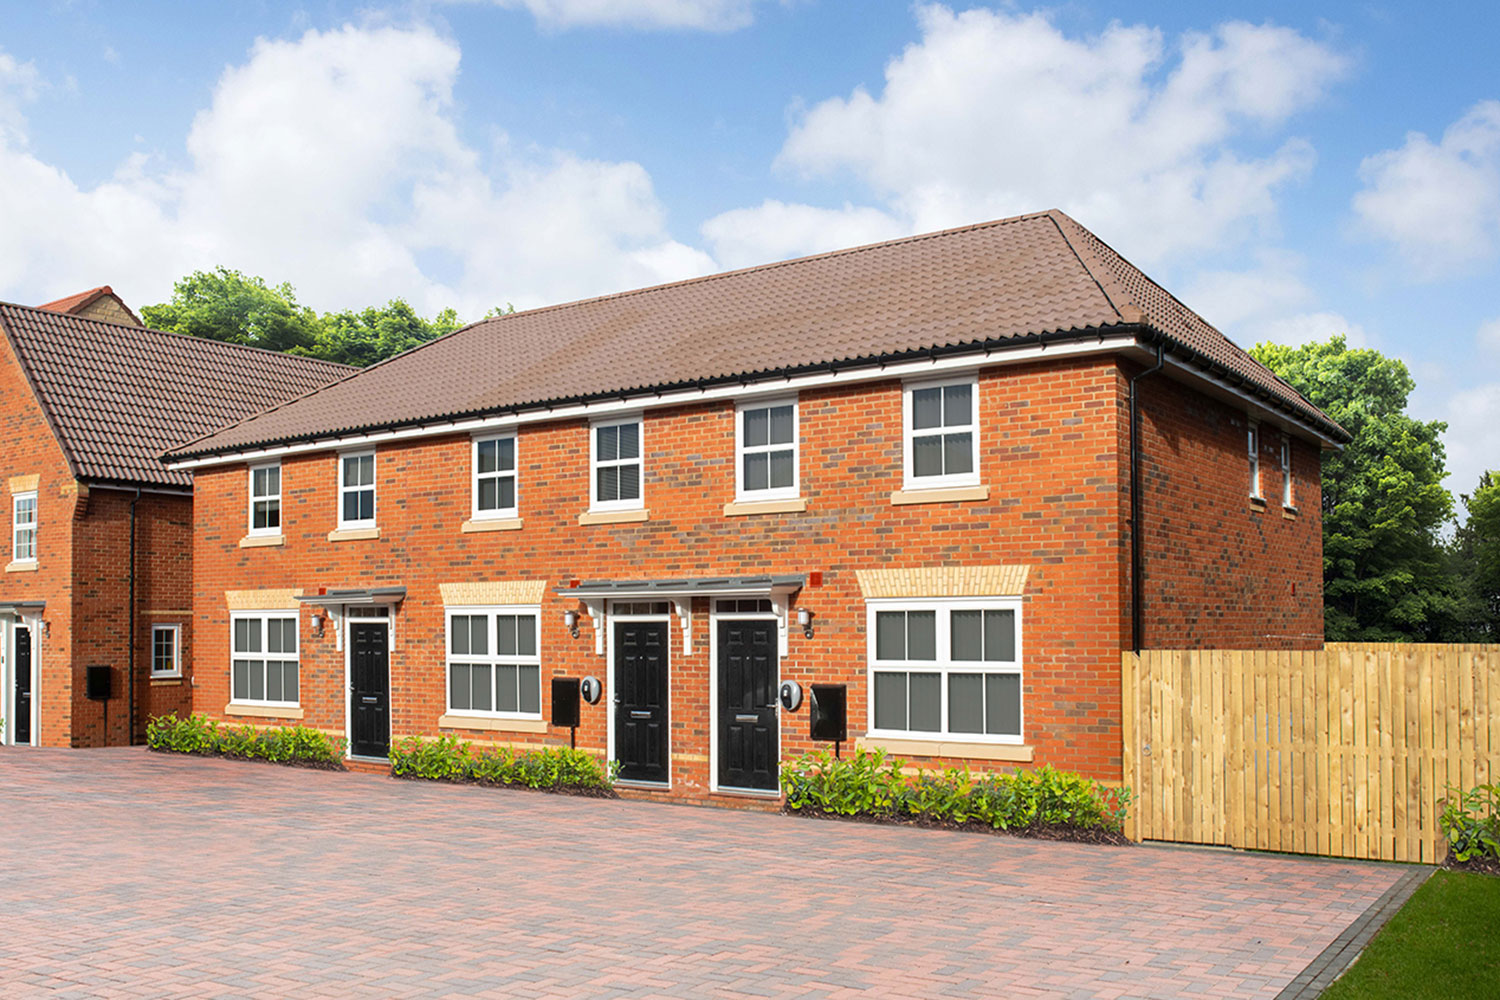 Property 1 of 8. The Archford At Minster View, Beverley